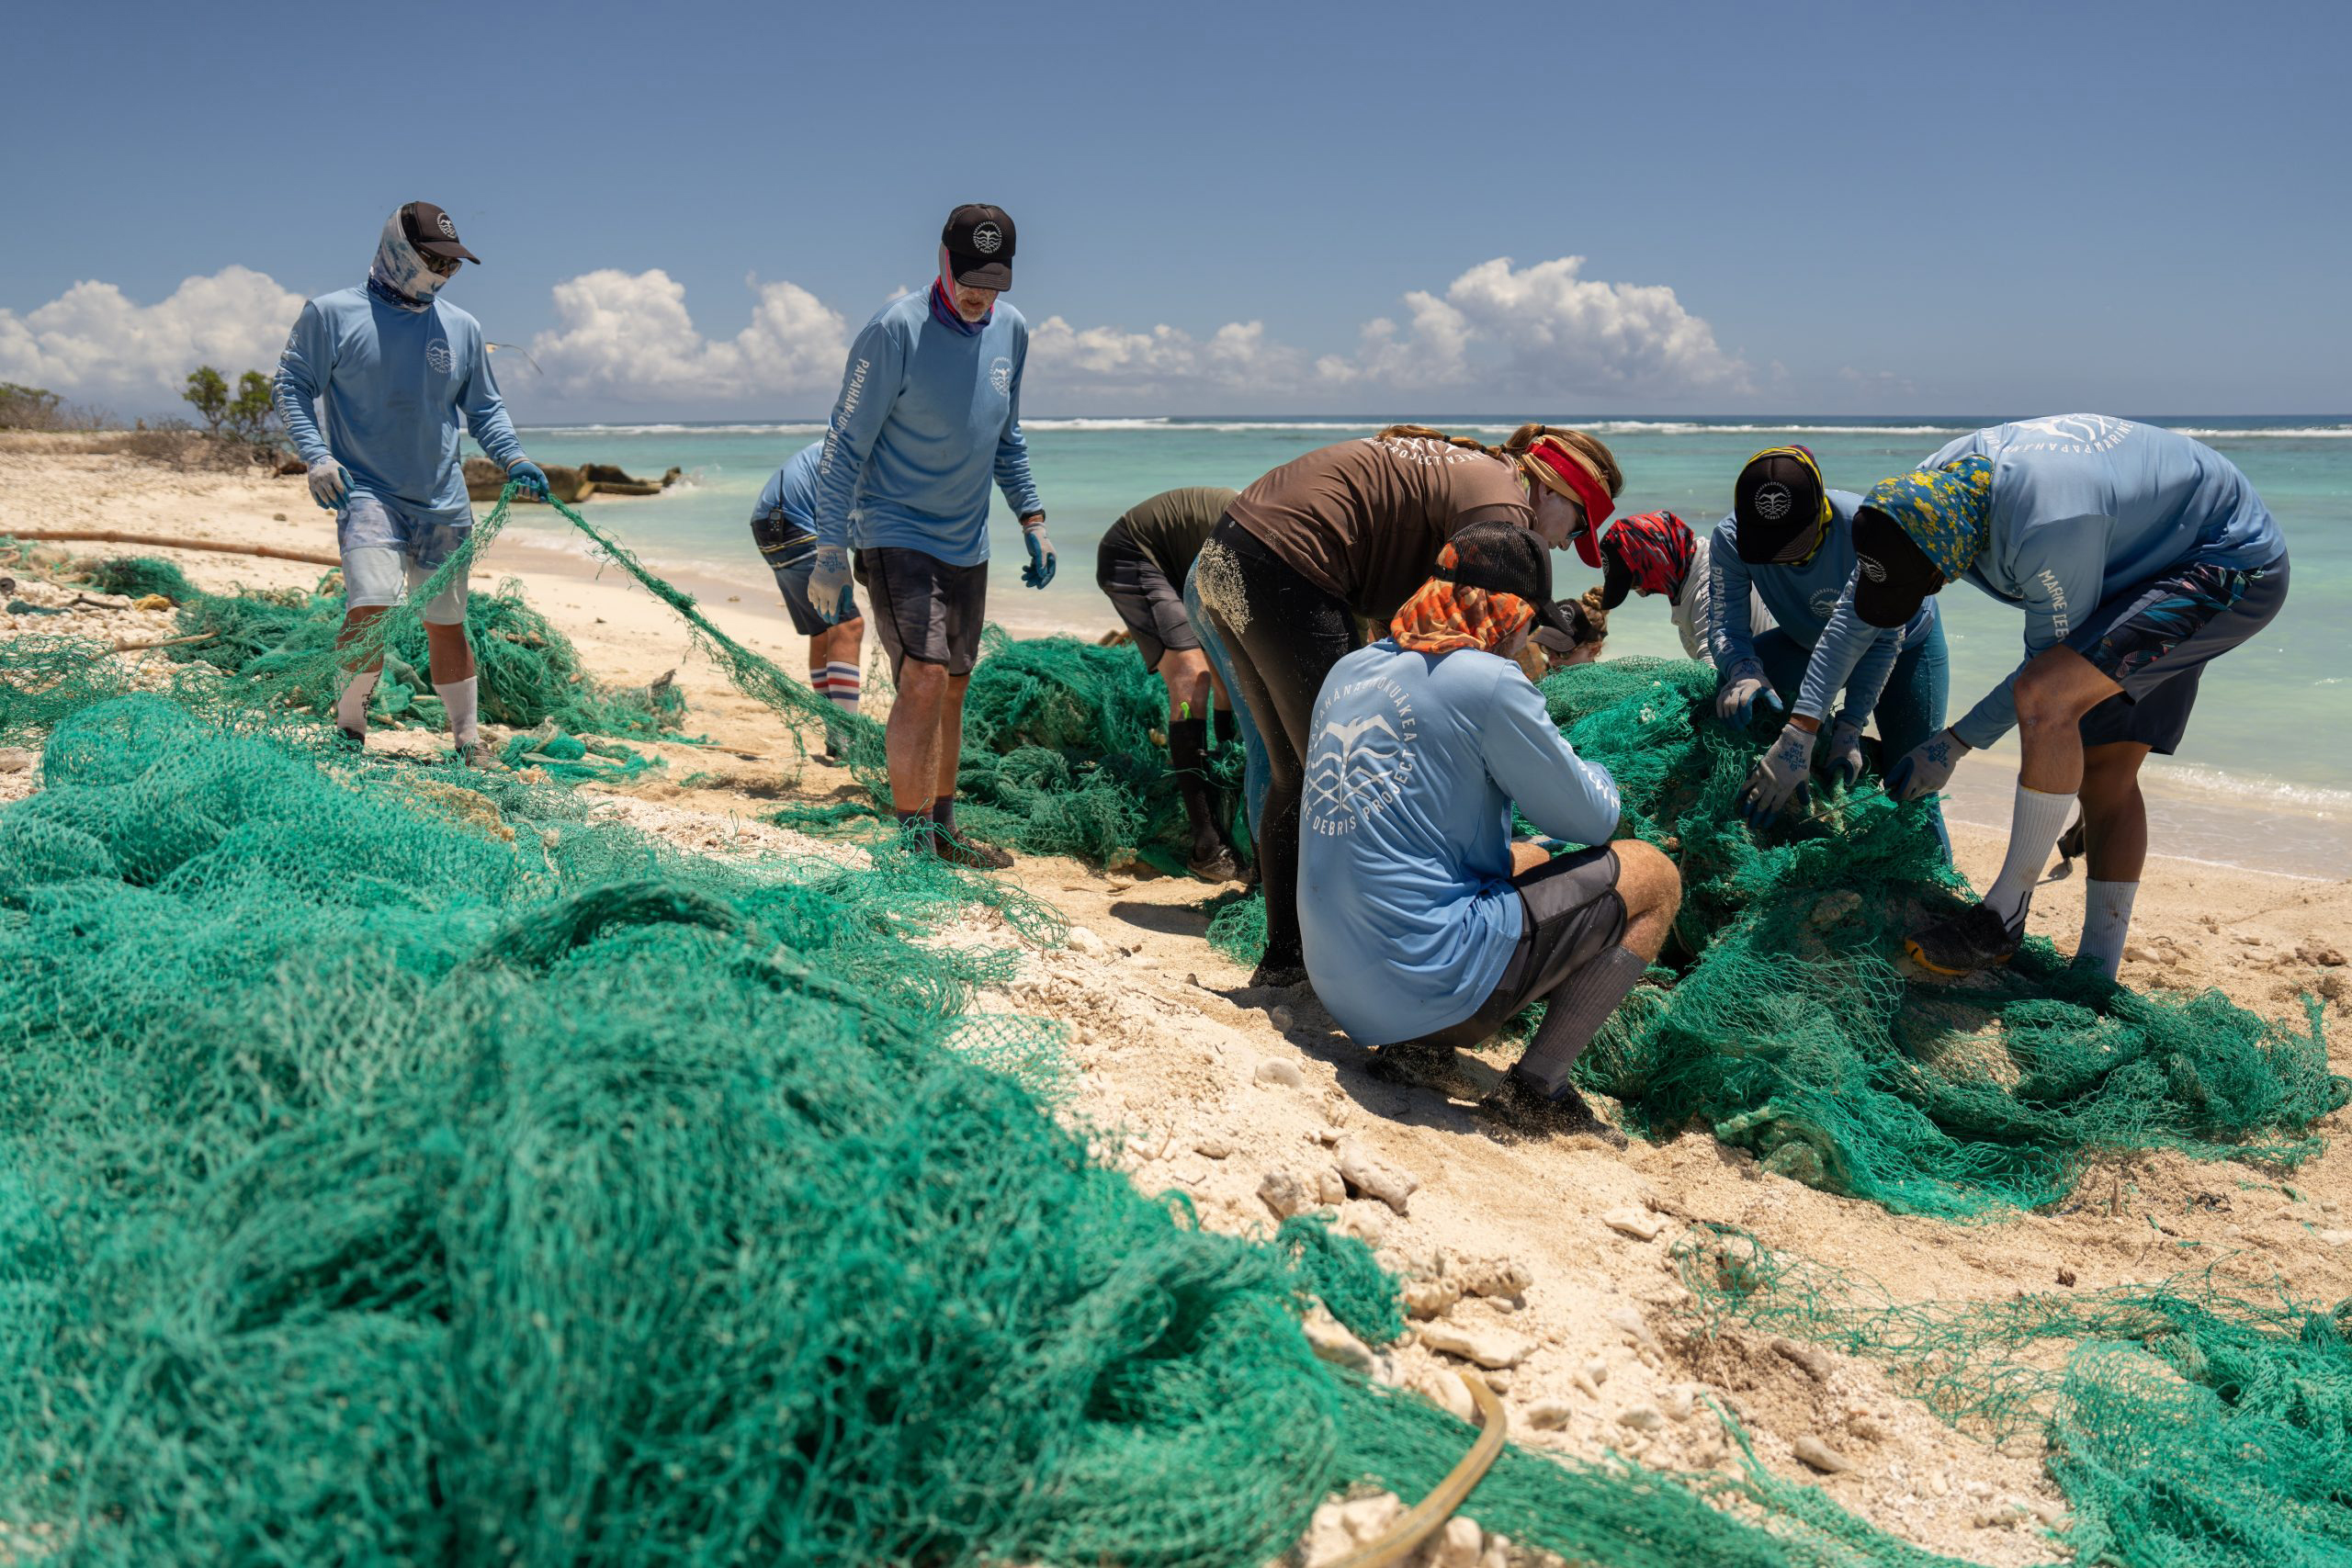 A group of people wearing blue long-sleeve shirts, hats, and gloves are working together to remove large green fishing nets from a sandy beach. The ocean and a clear blue sky are in the background, with some scattered clouds. The scene depicts a coastal cleanup effort.